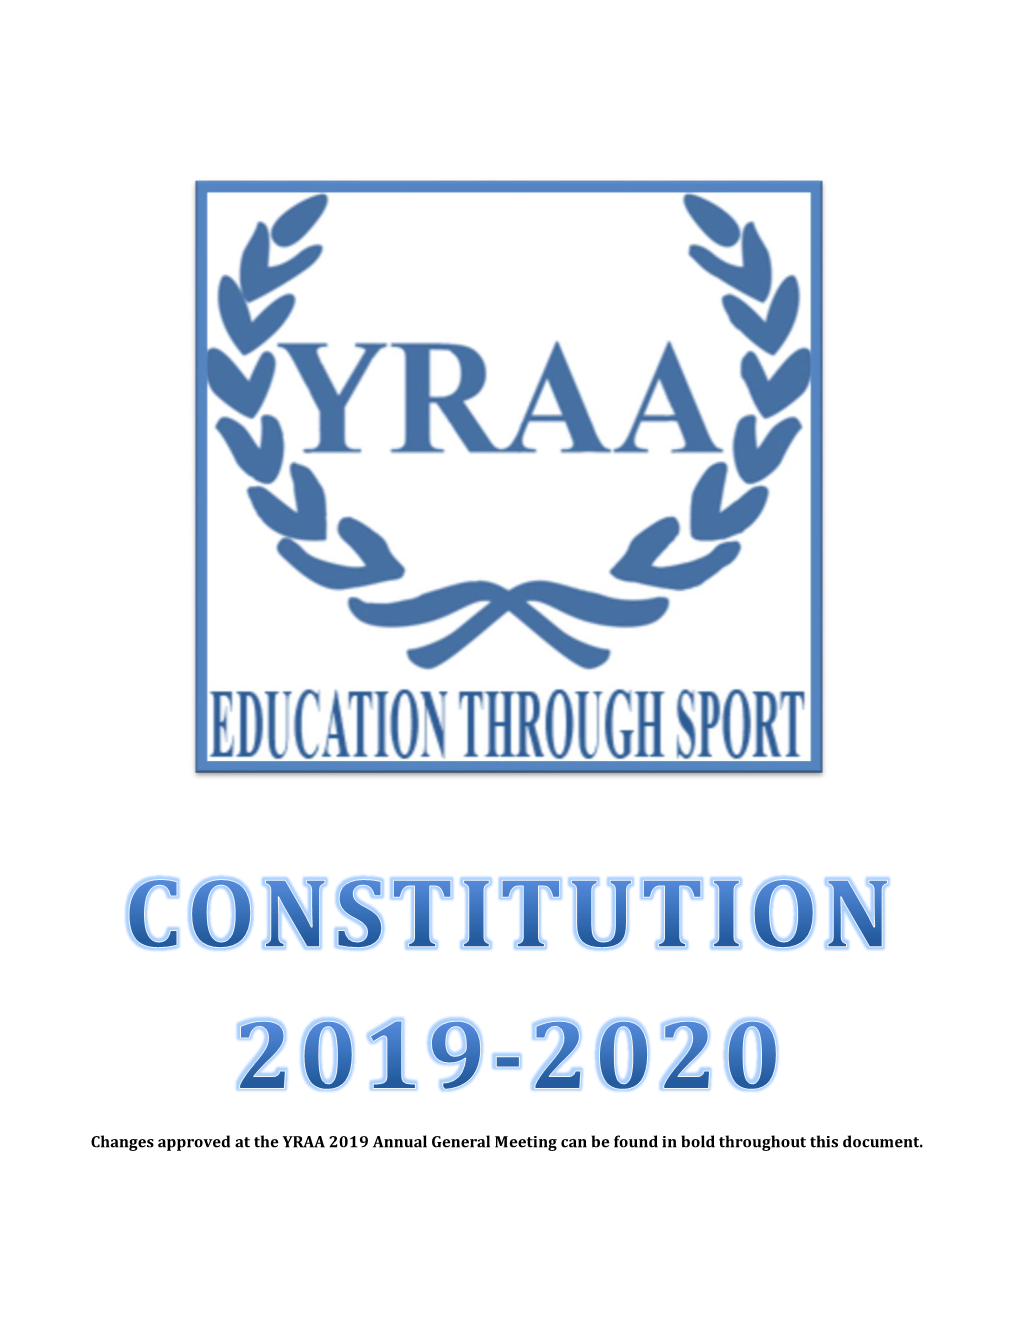 Changes Approved at the YRAA 2019 Annual General Meeting Can Be Found in Bold Throughout This Document